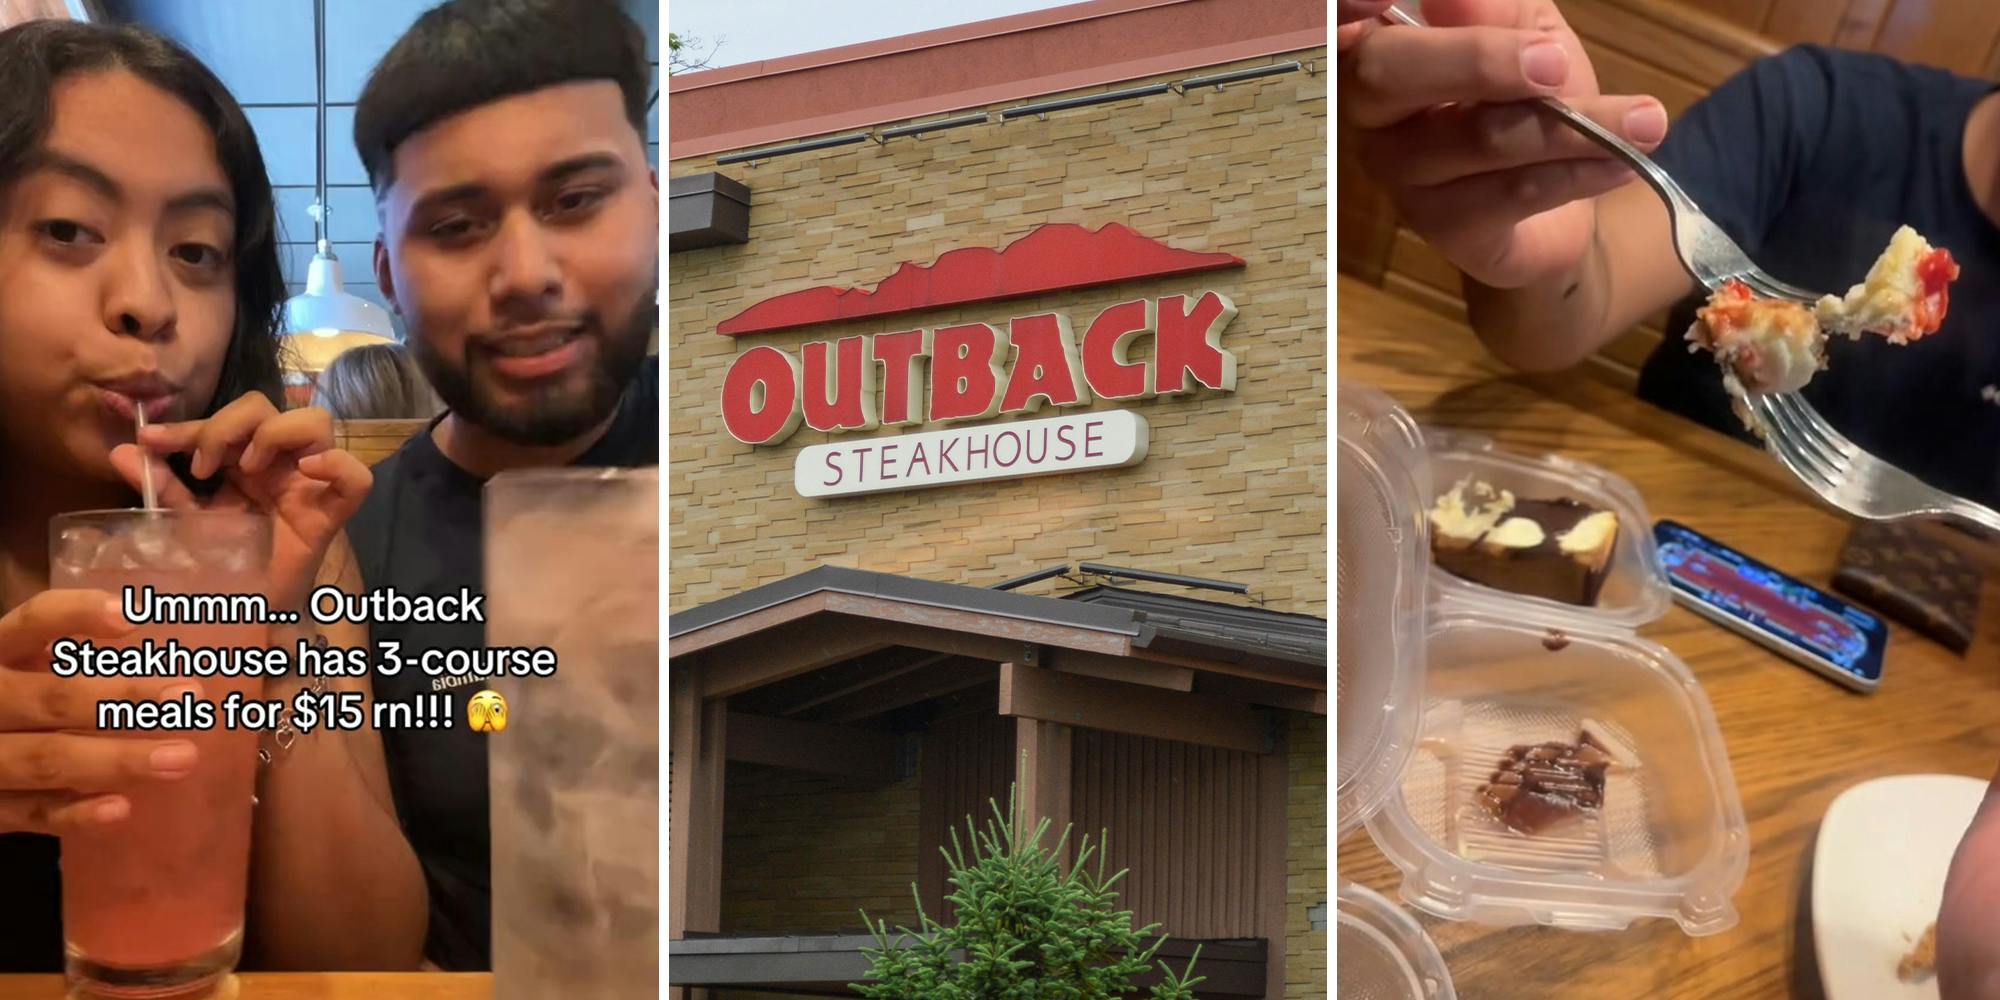 ‘Texas Roadhouse over Outback tbh’: Guests try Outback Steakhouse’s 3-course meal for $15. Is it worth it?